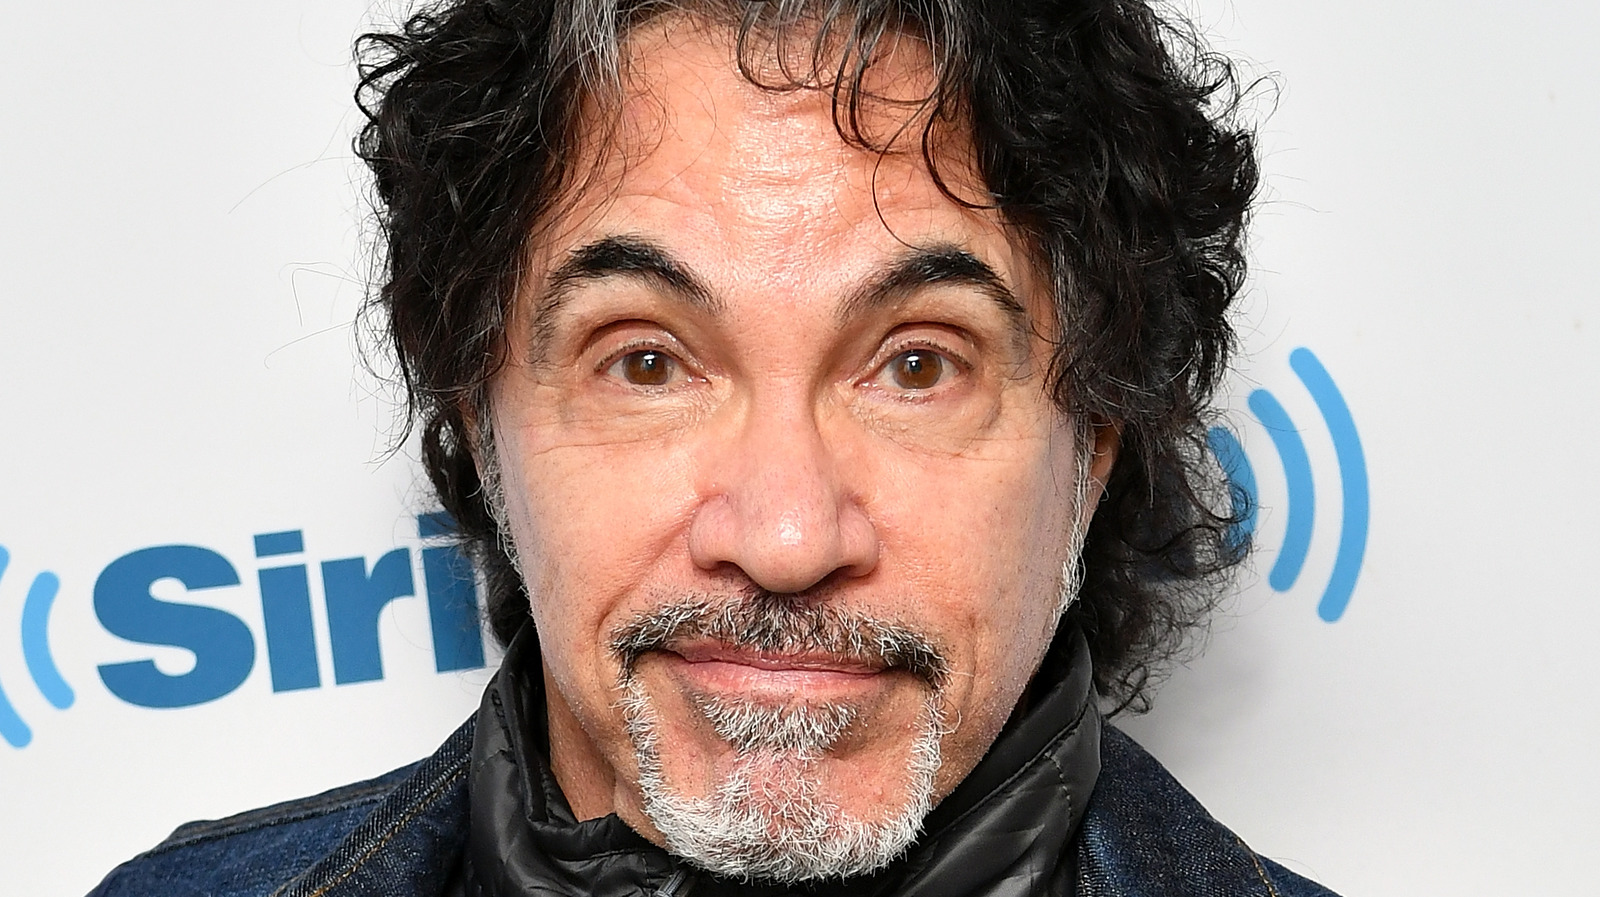 John Oates List Of Celebrity Friends Is Seriously Impressive - Exclusive